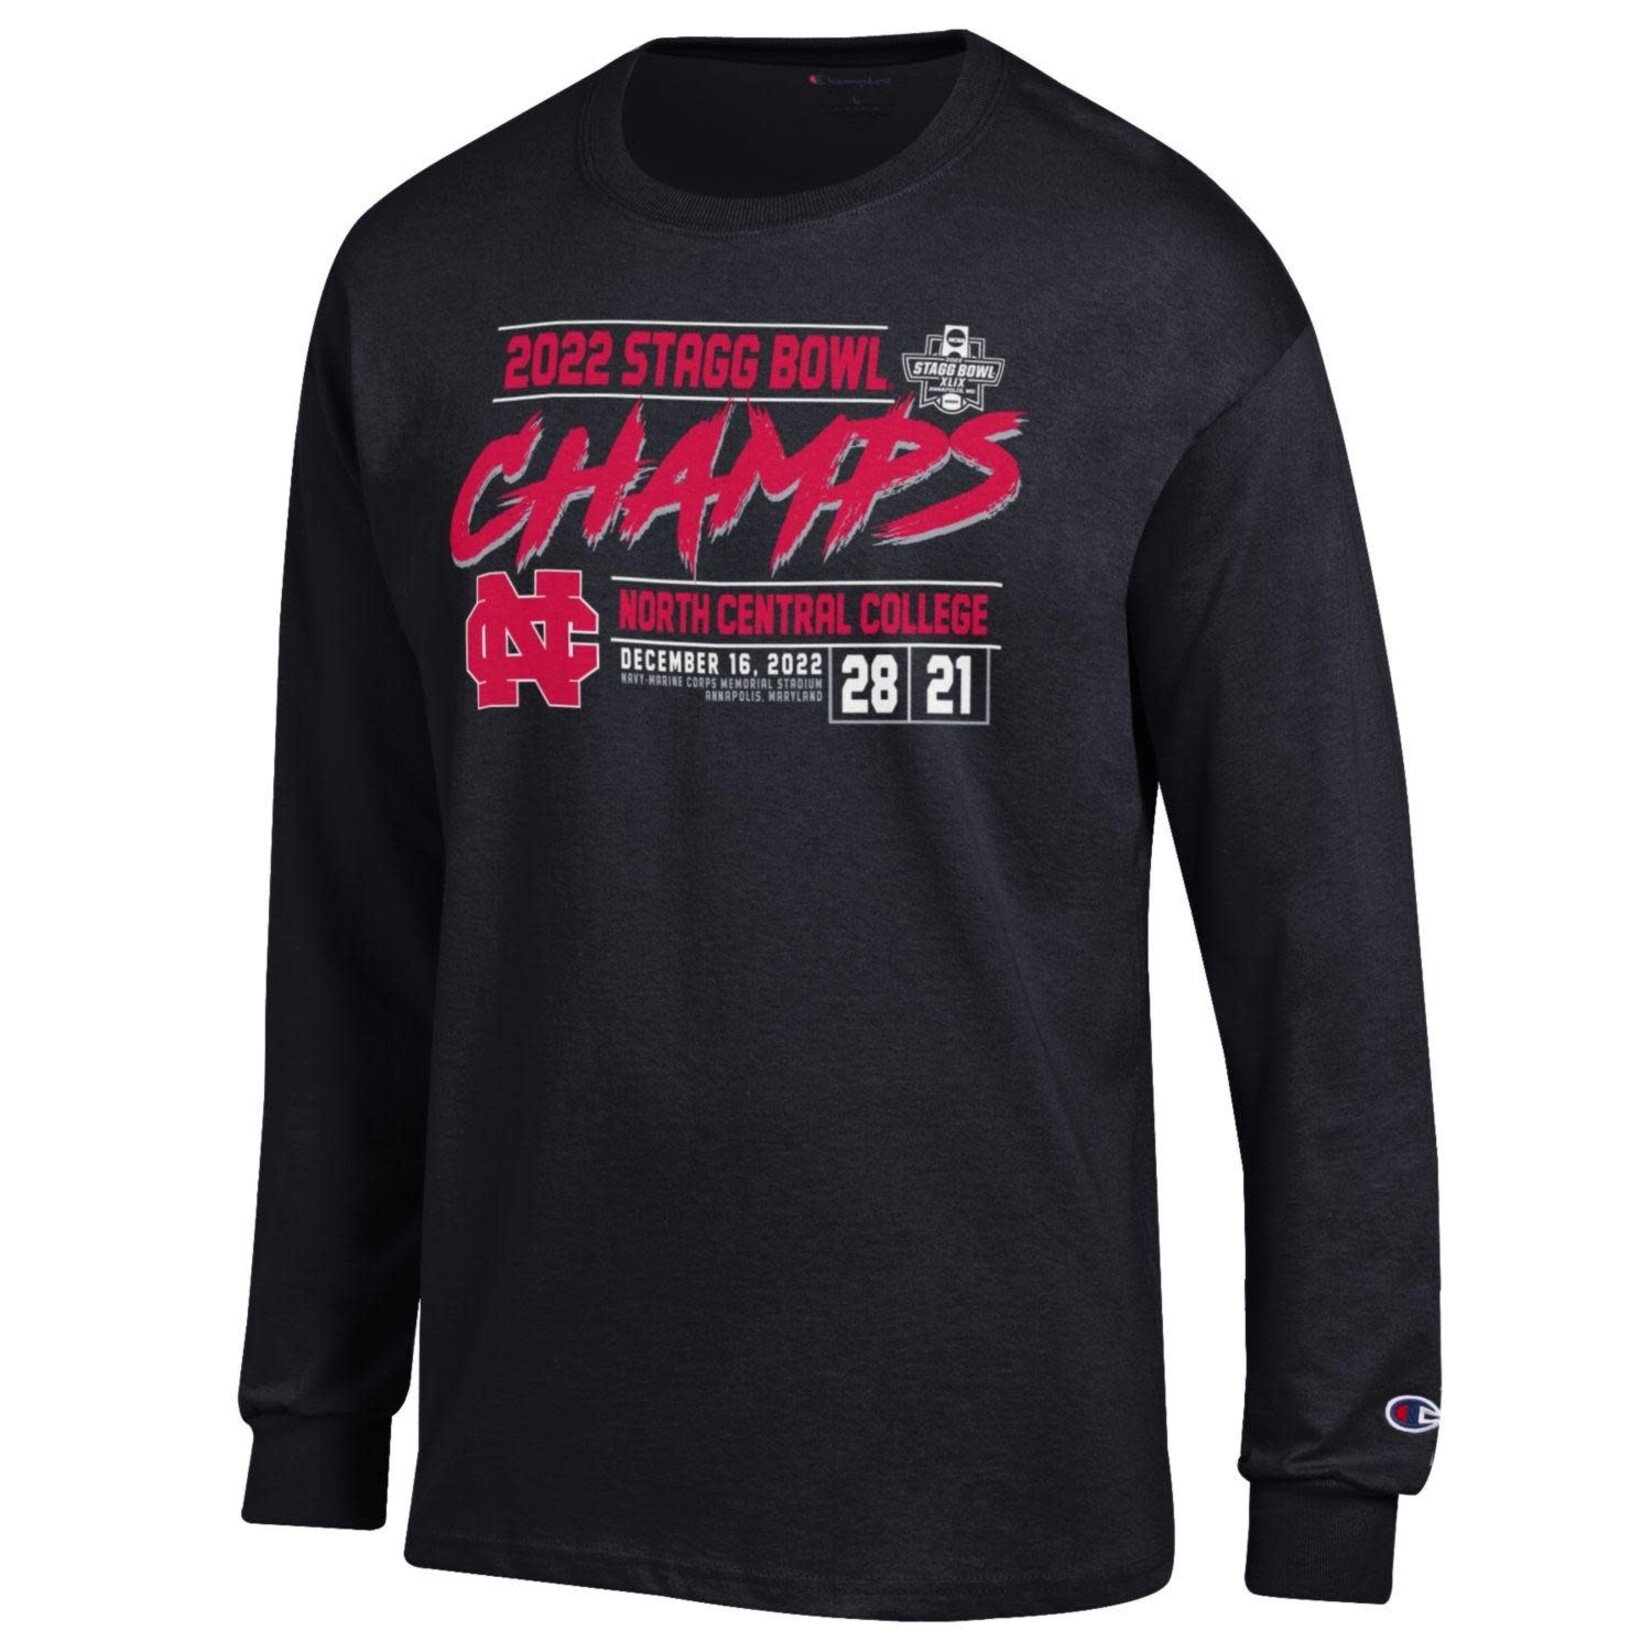 Champion 2022 Stagg Bowl Long Sleeve Tee w/score by Champion